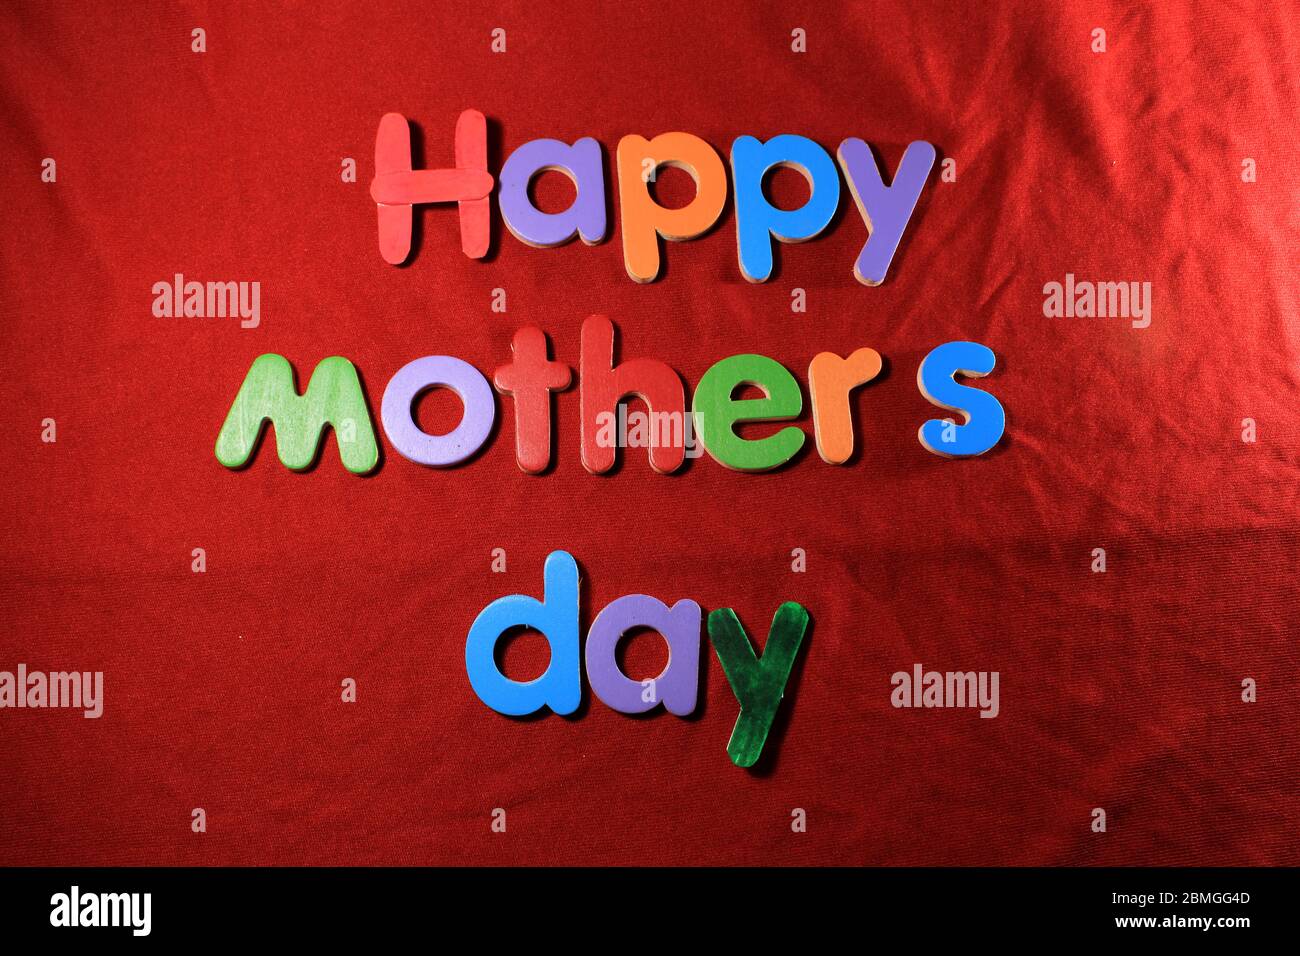 Happy Mother's Day written on red cloth texture background. Happy Mother's day written by colorful alphabet blocks. Stock Photo